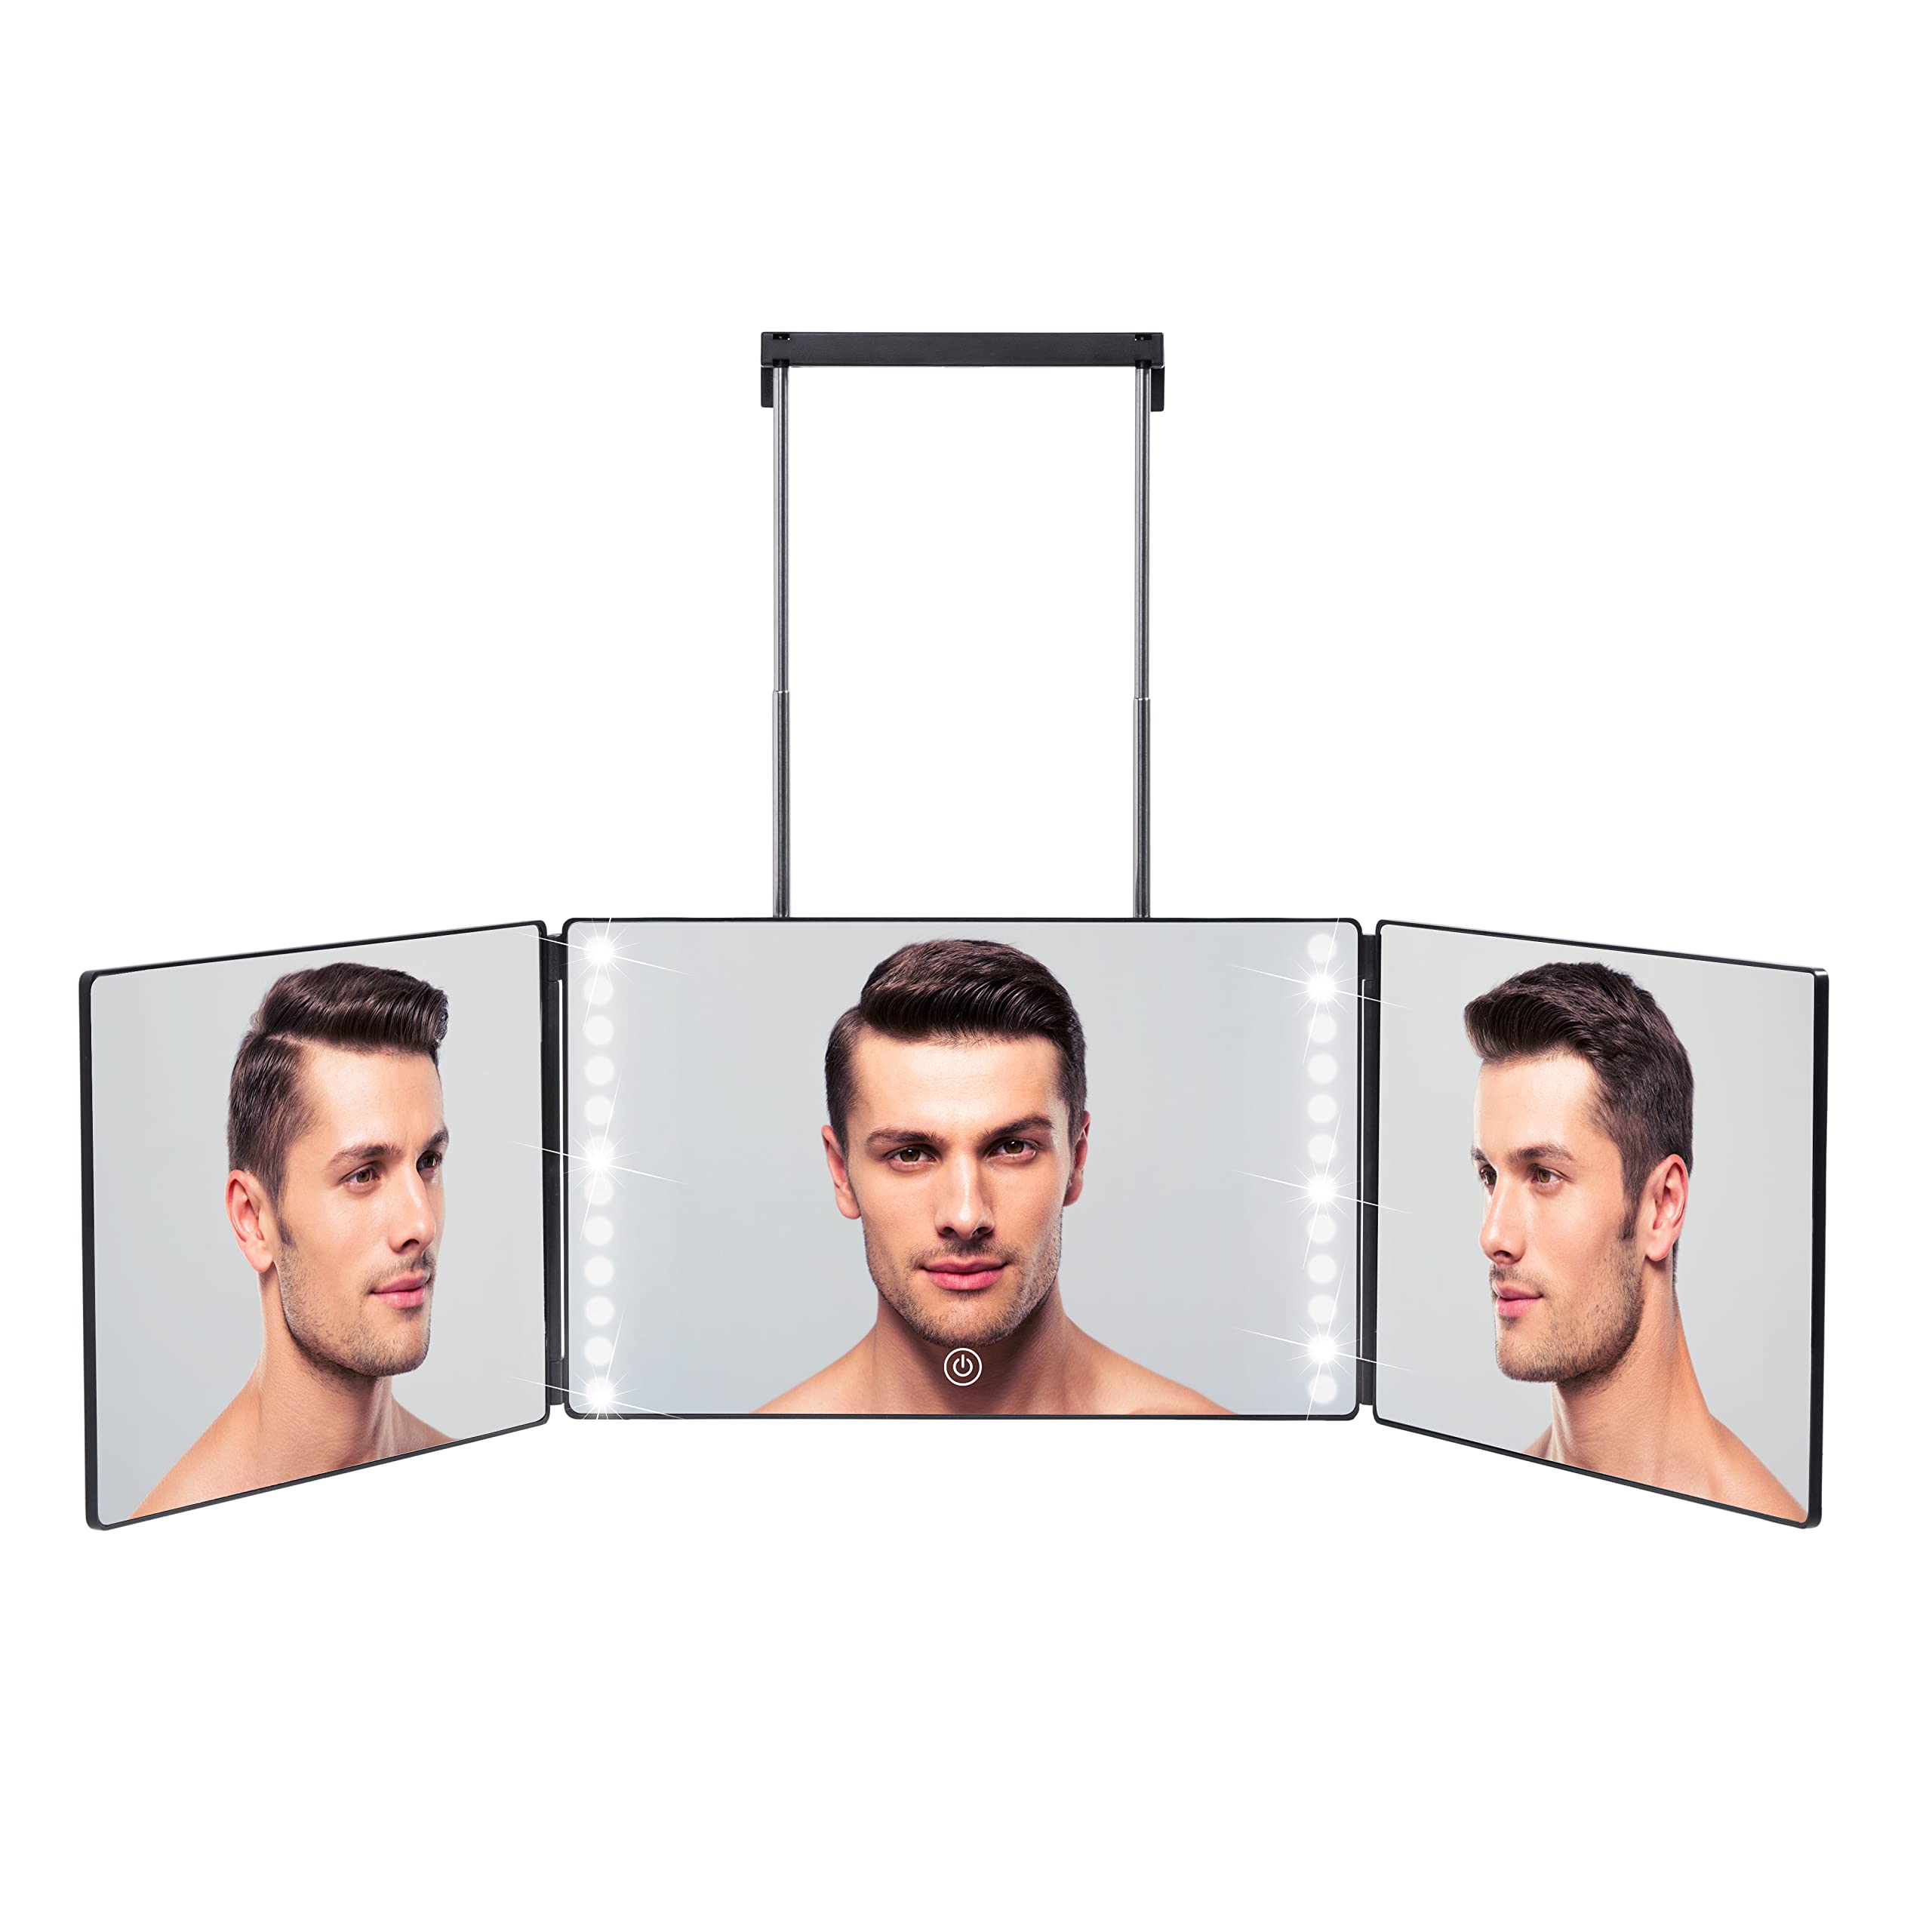 IN-COG-NEATO 3 Way Mirror for Hair Cutting Self Barber Haircut LED Lights  Rechargeable Battery